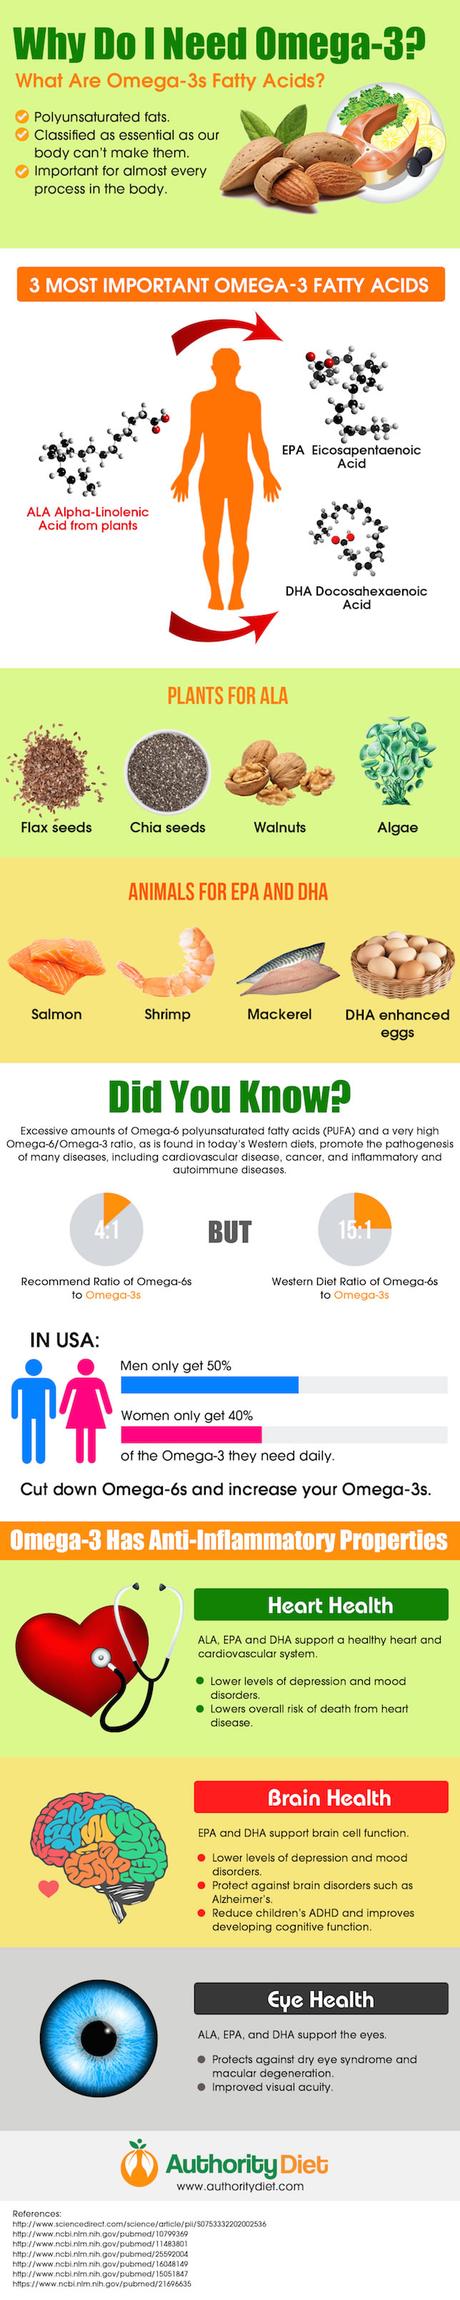 3 Most Crucial Types of Omega-3 Essential Fatty Acids